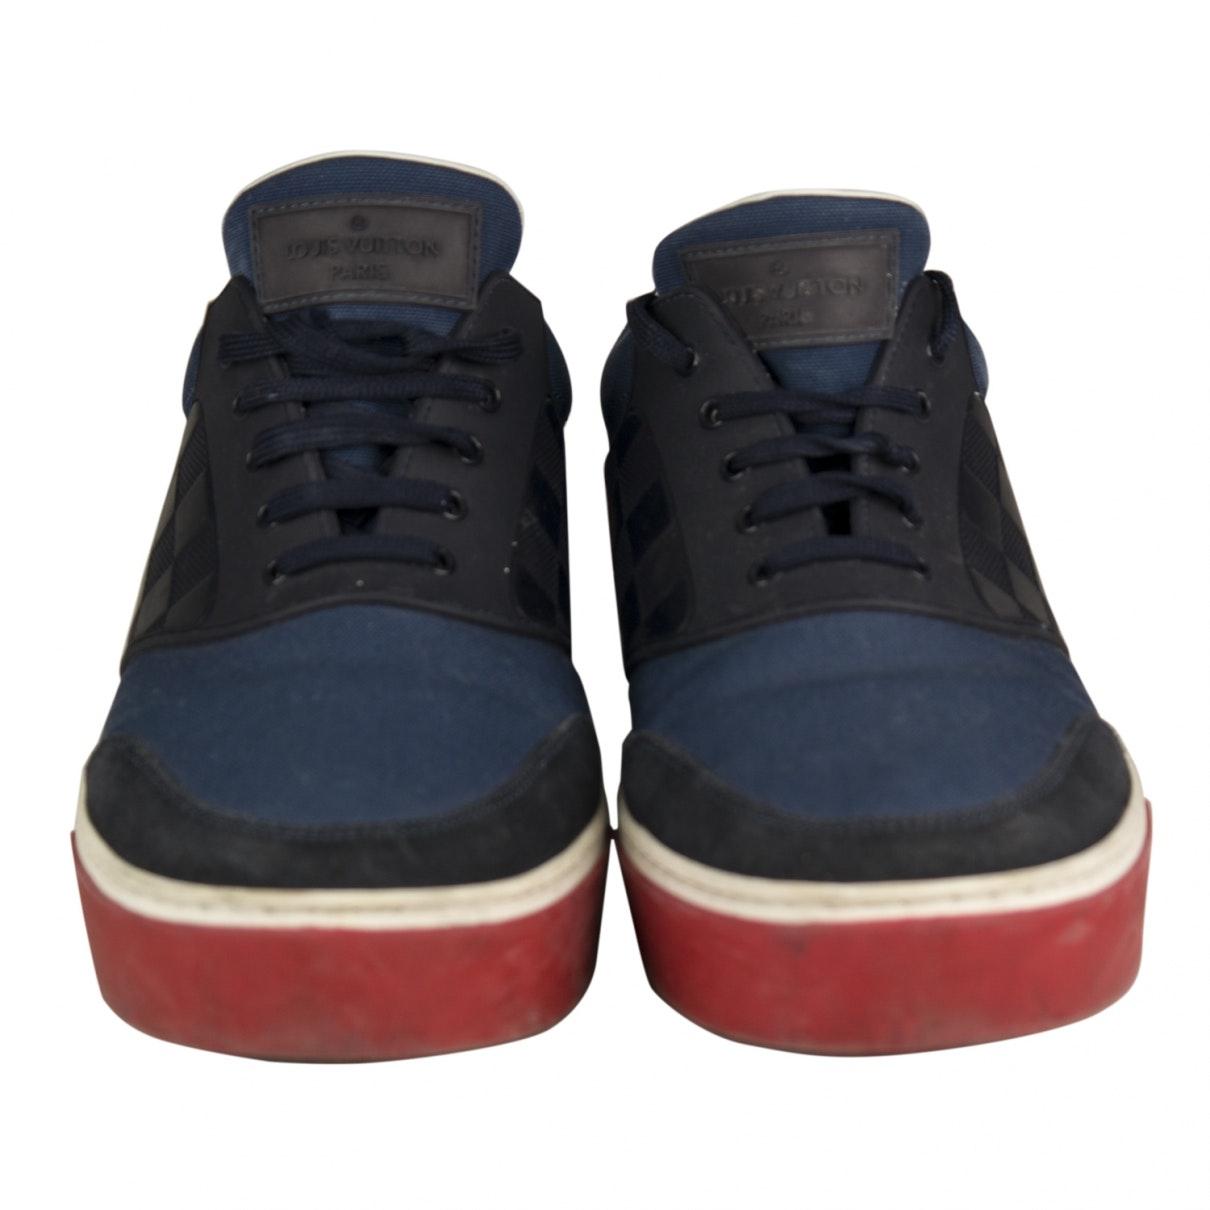 Louis Vuitton n Multicolour Leather Trainers in Blue for Men - Lyst